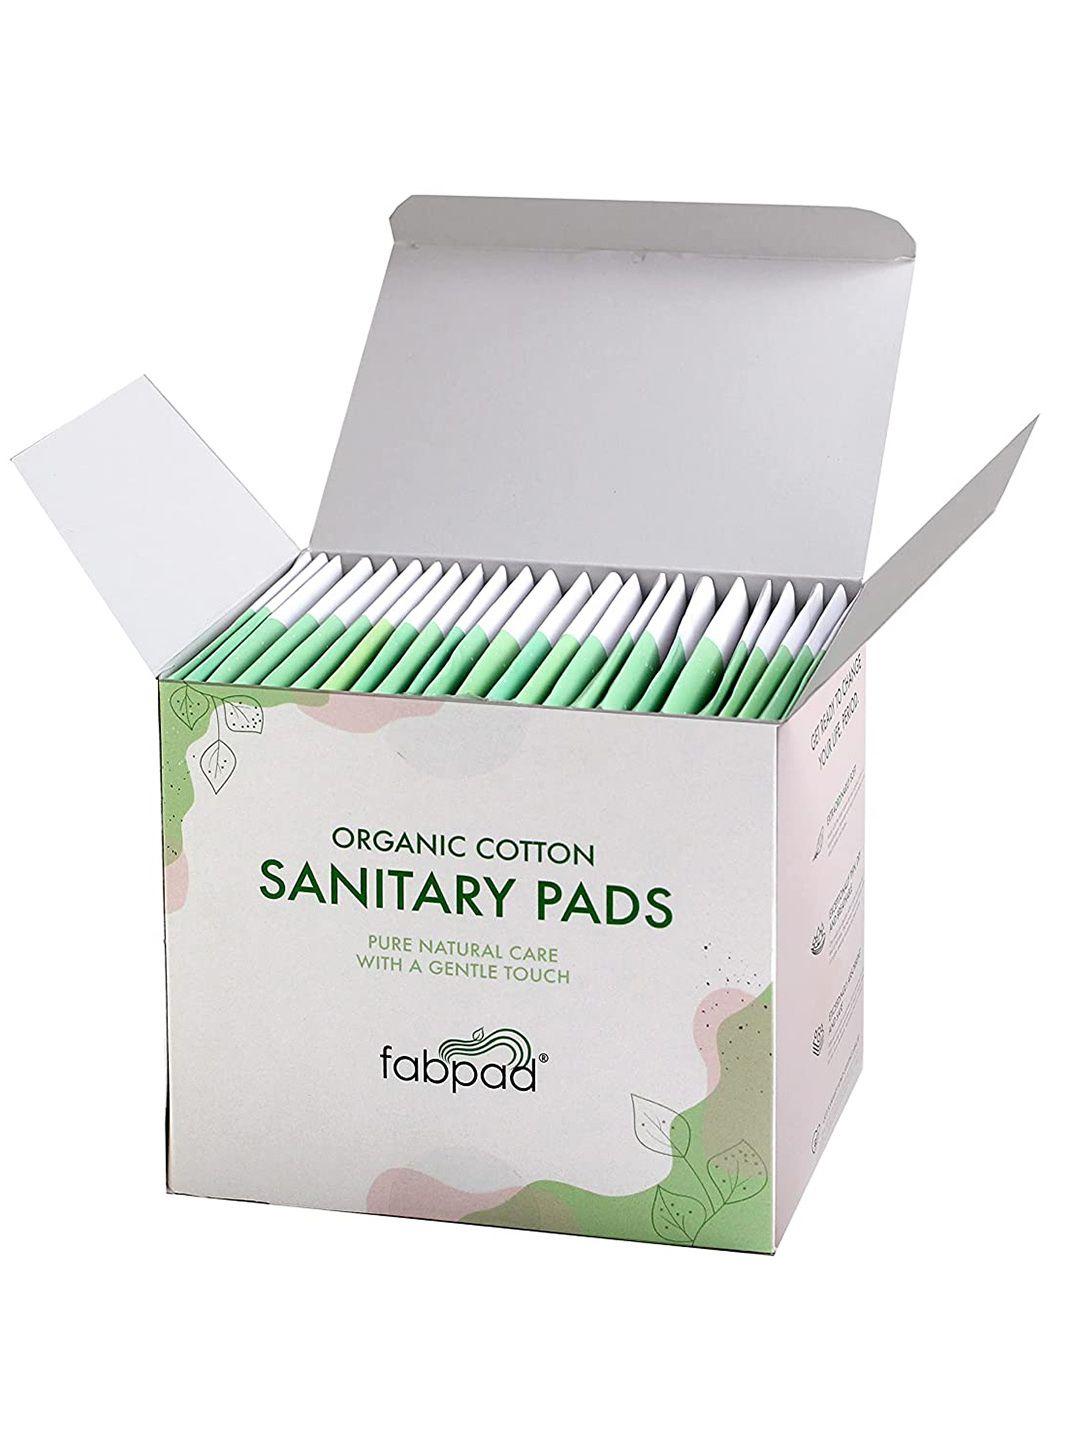 fabpad set of 24 organic cotton ultra thin medium flow sanitary pads with disposable cover